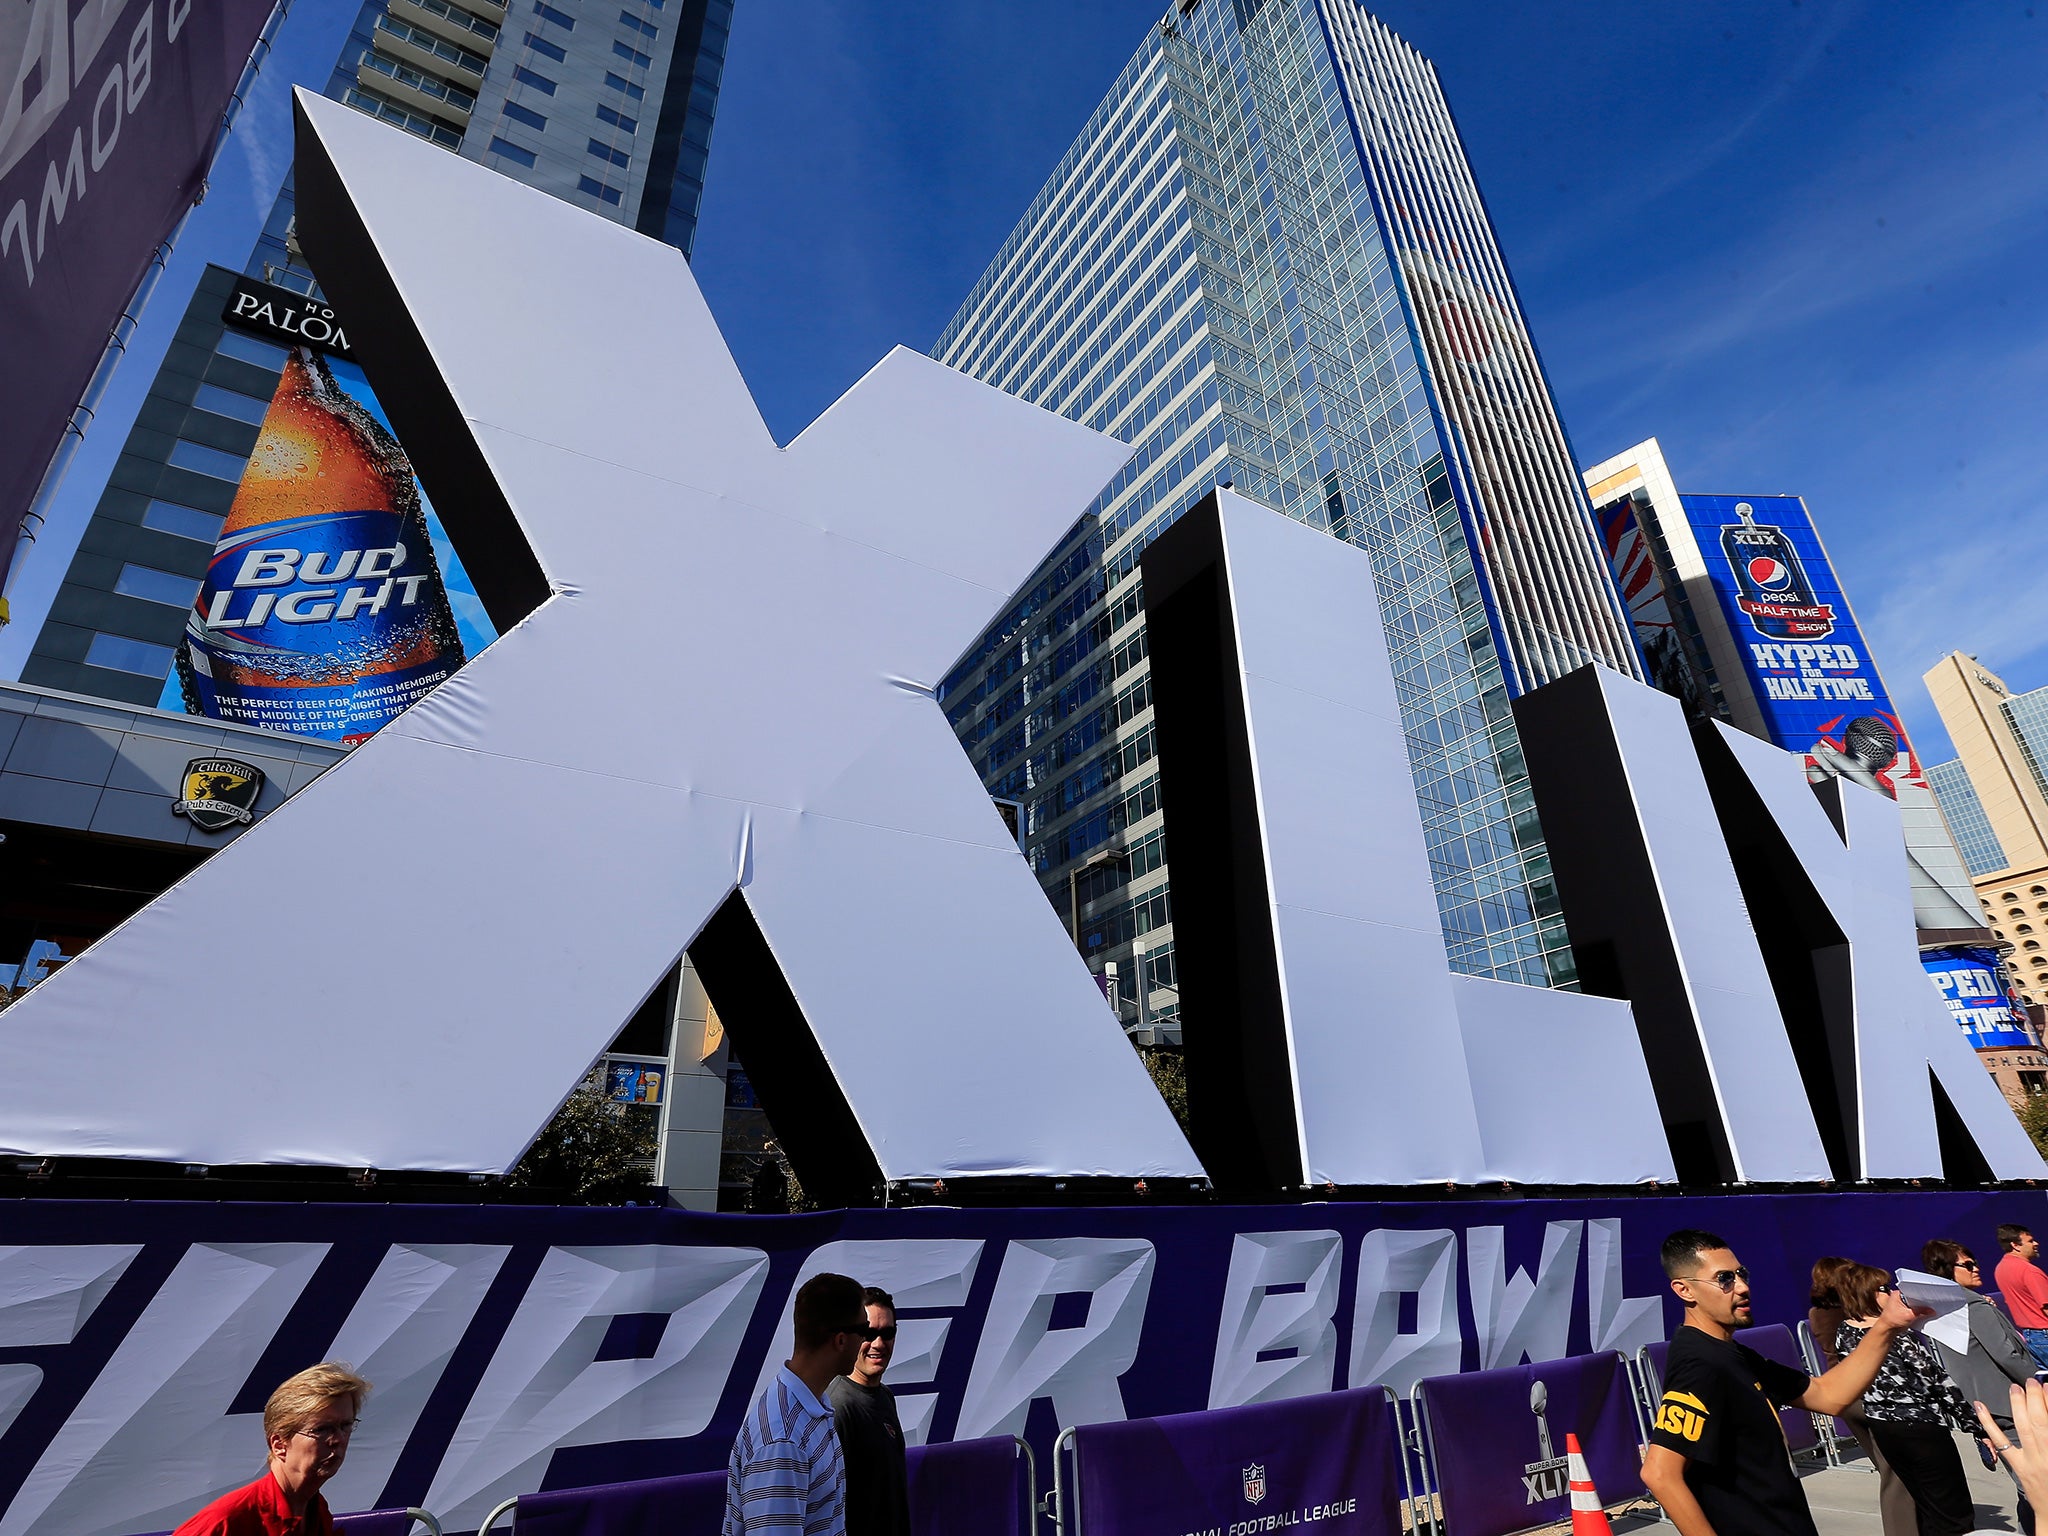 People walk past the logo for the Super Bowl XLIX